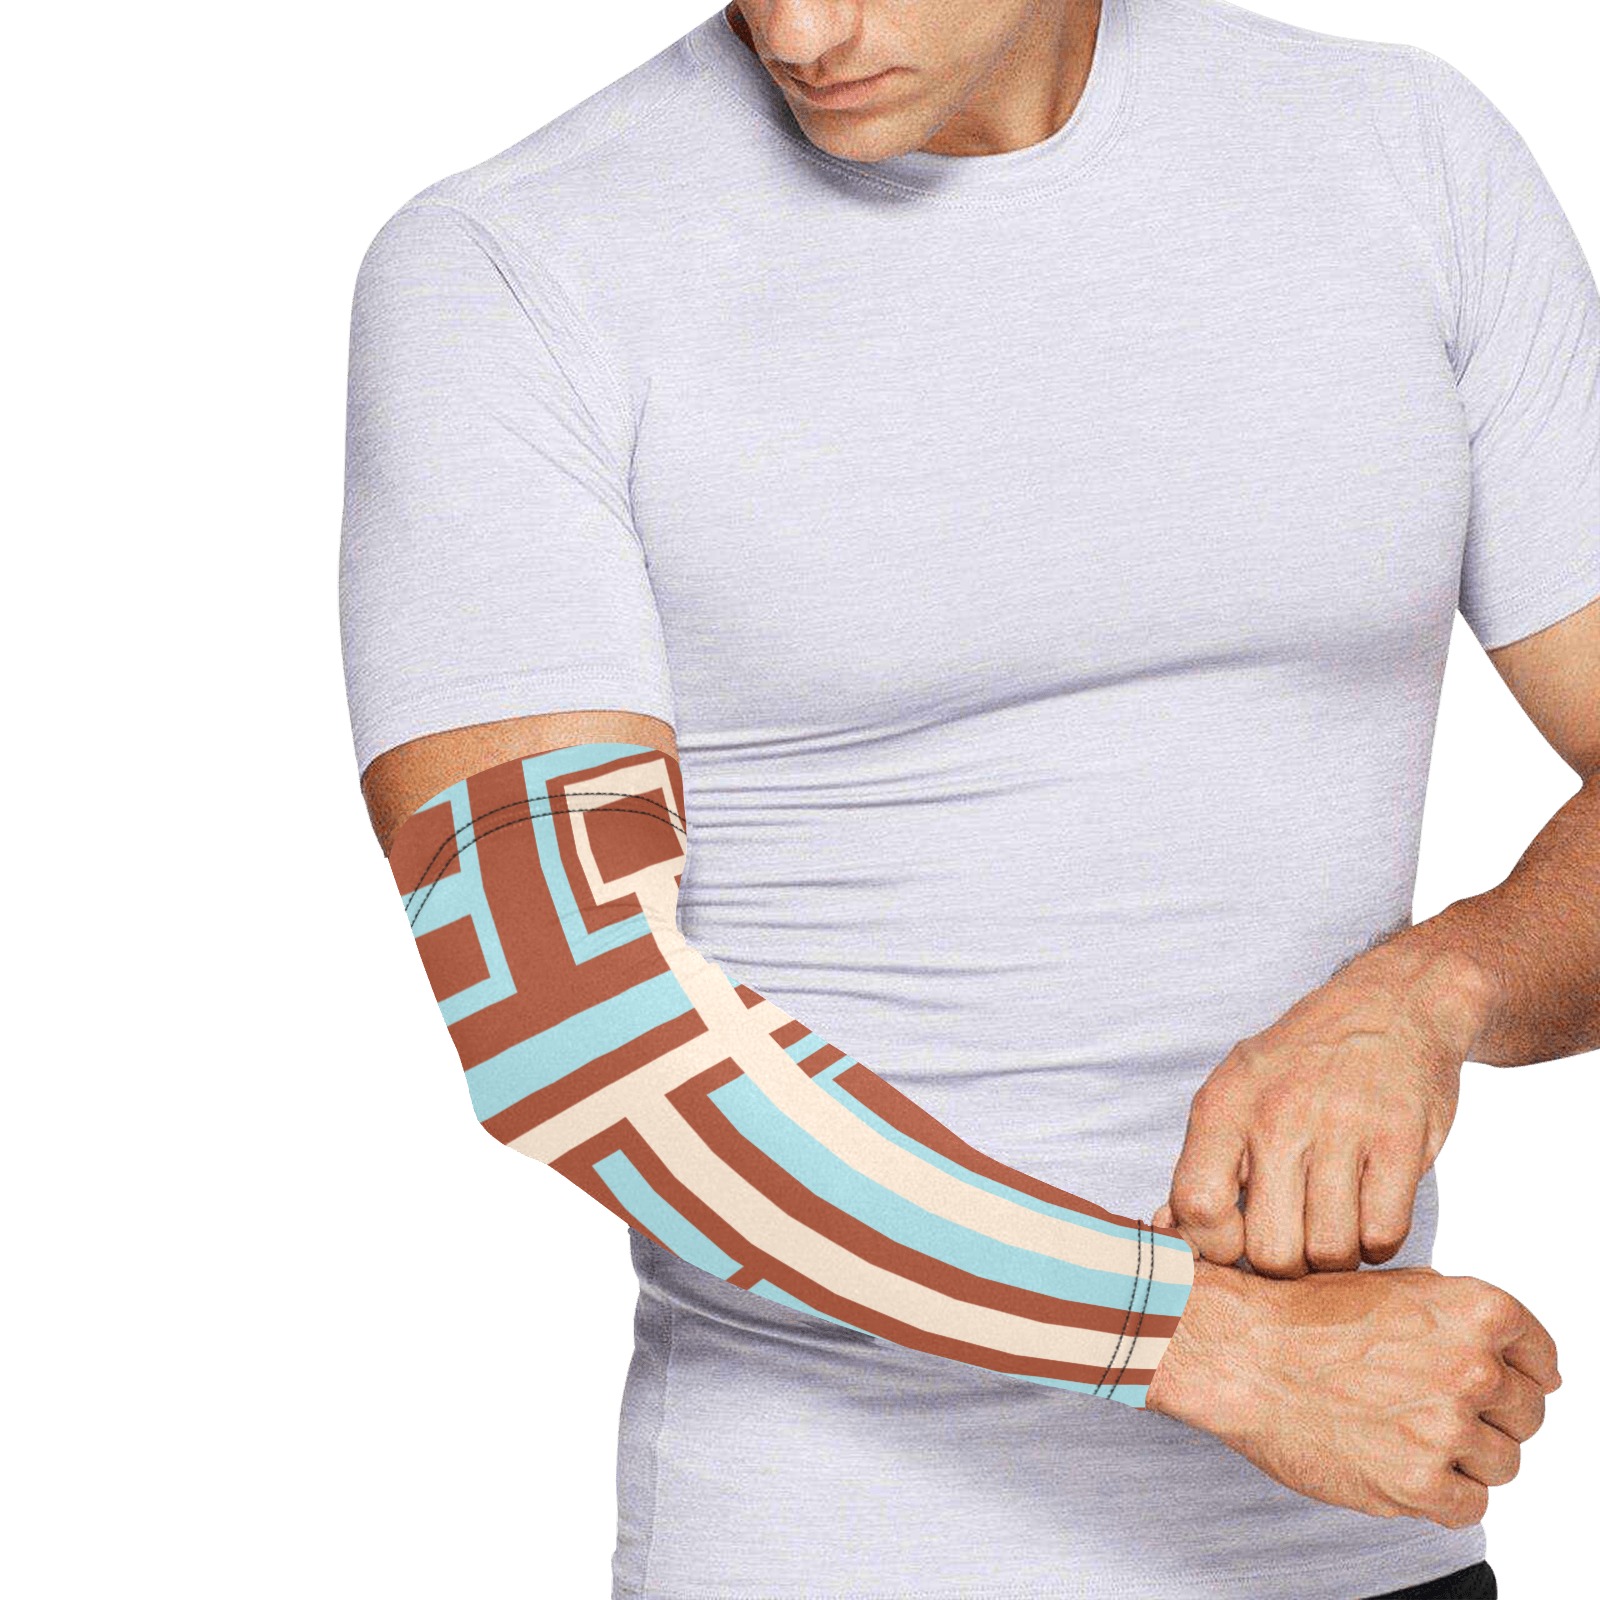 Model 1 Arm Sleeves (Set of Two)